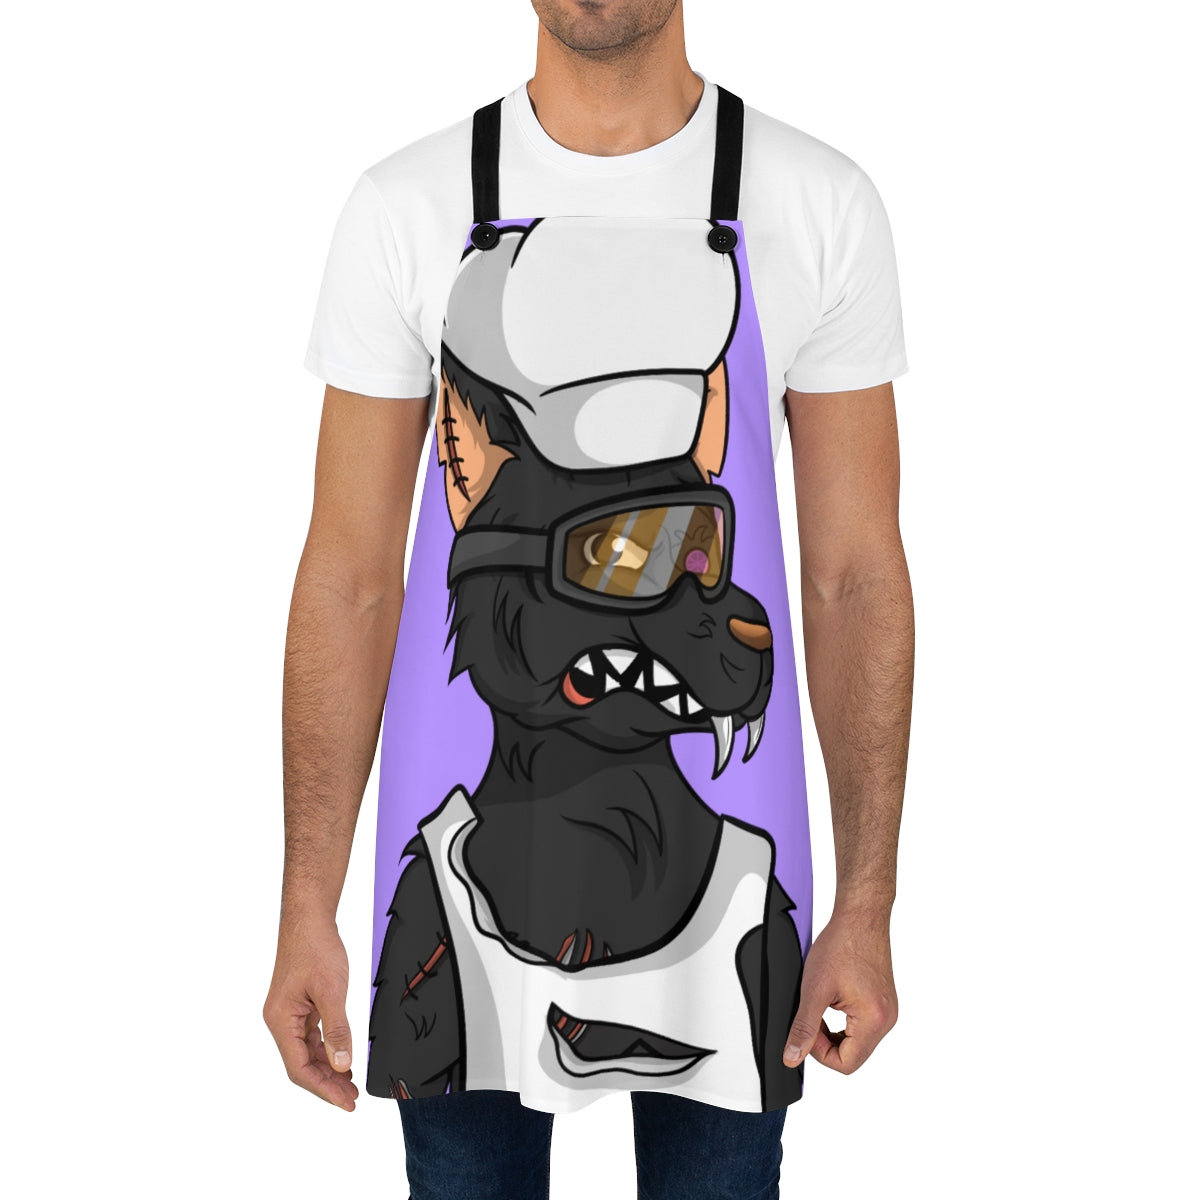 Chef Hat Cooking Wolf Muscle Shirt Ski Goggles Black Fur Cyborg Apron